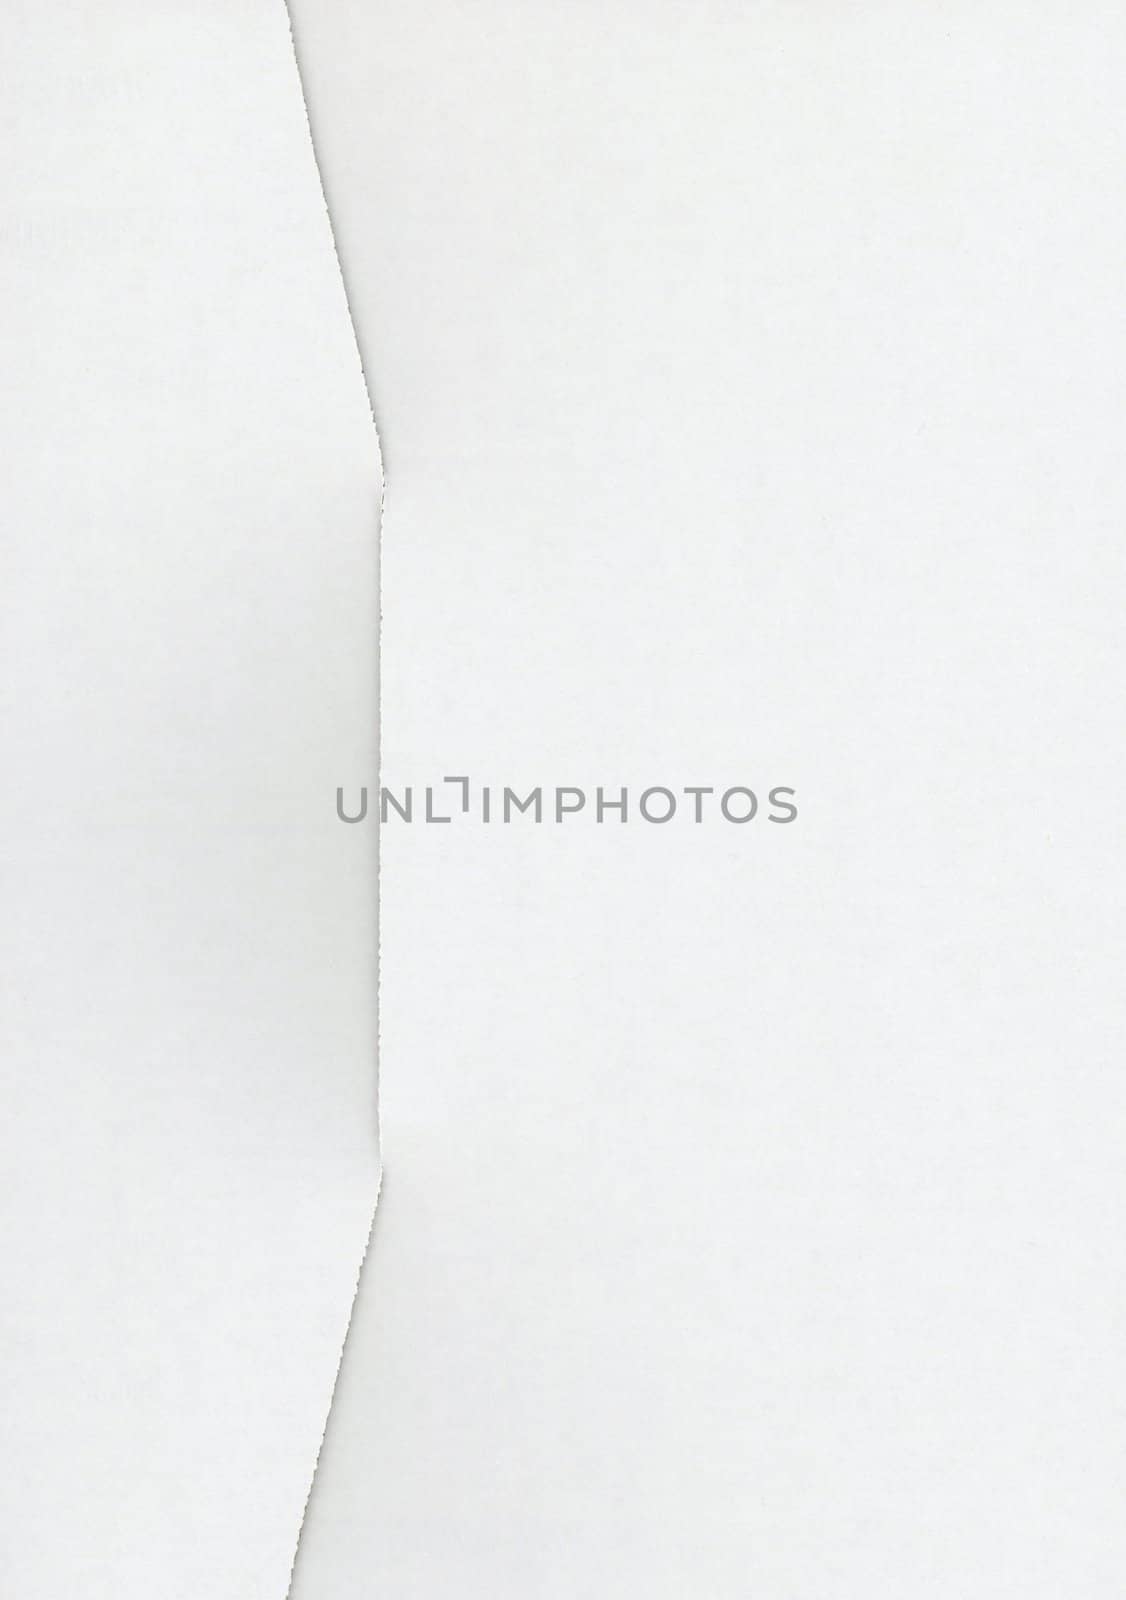 off white cardboard texture background by claudiodivizia